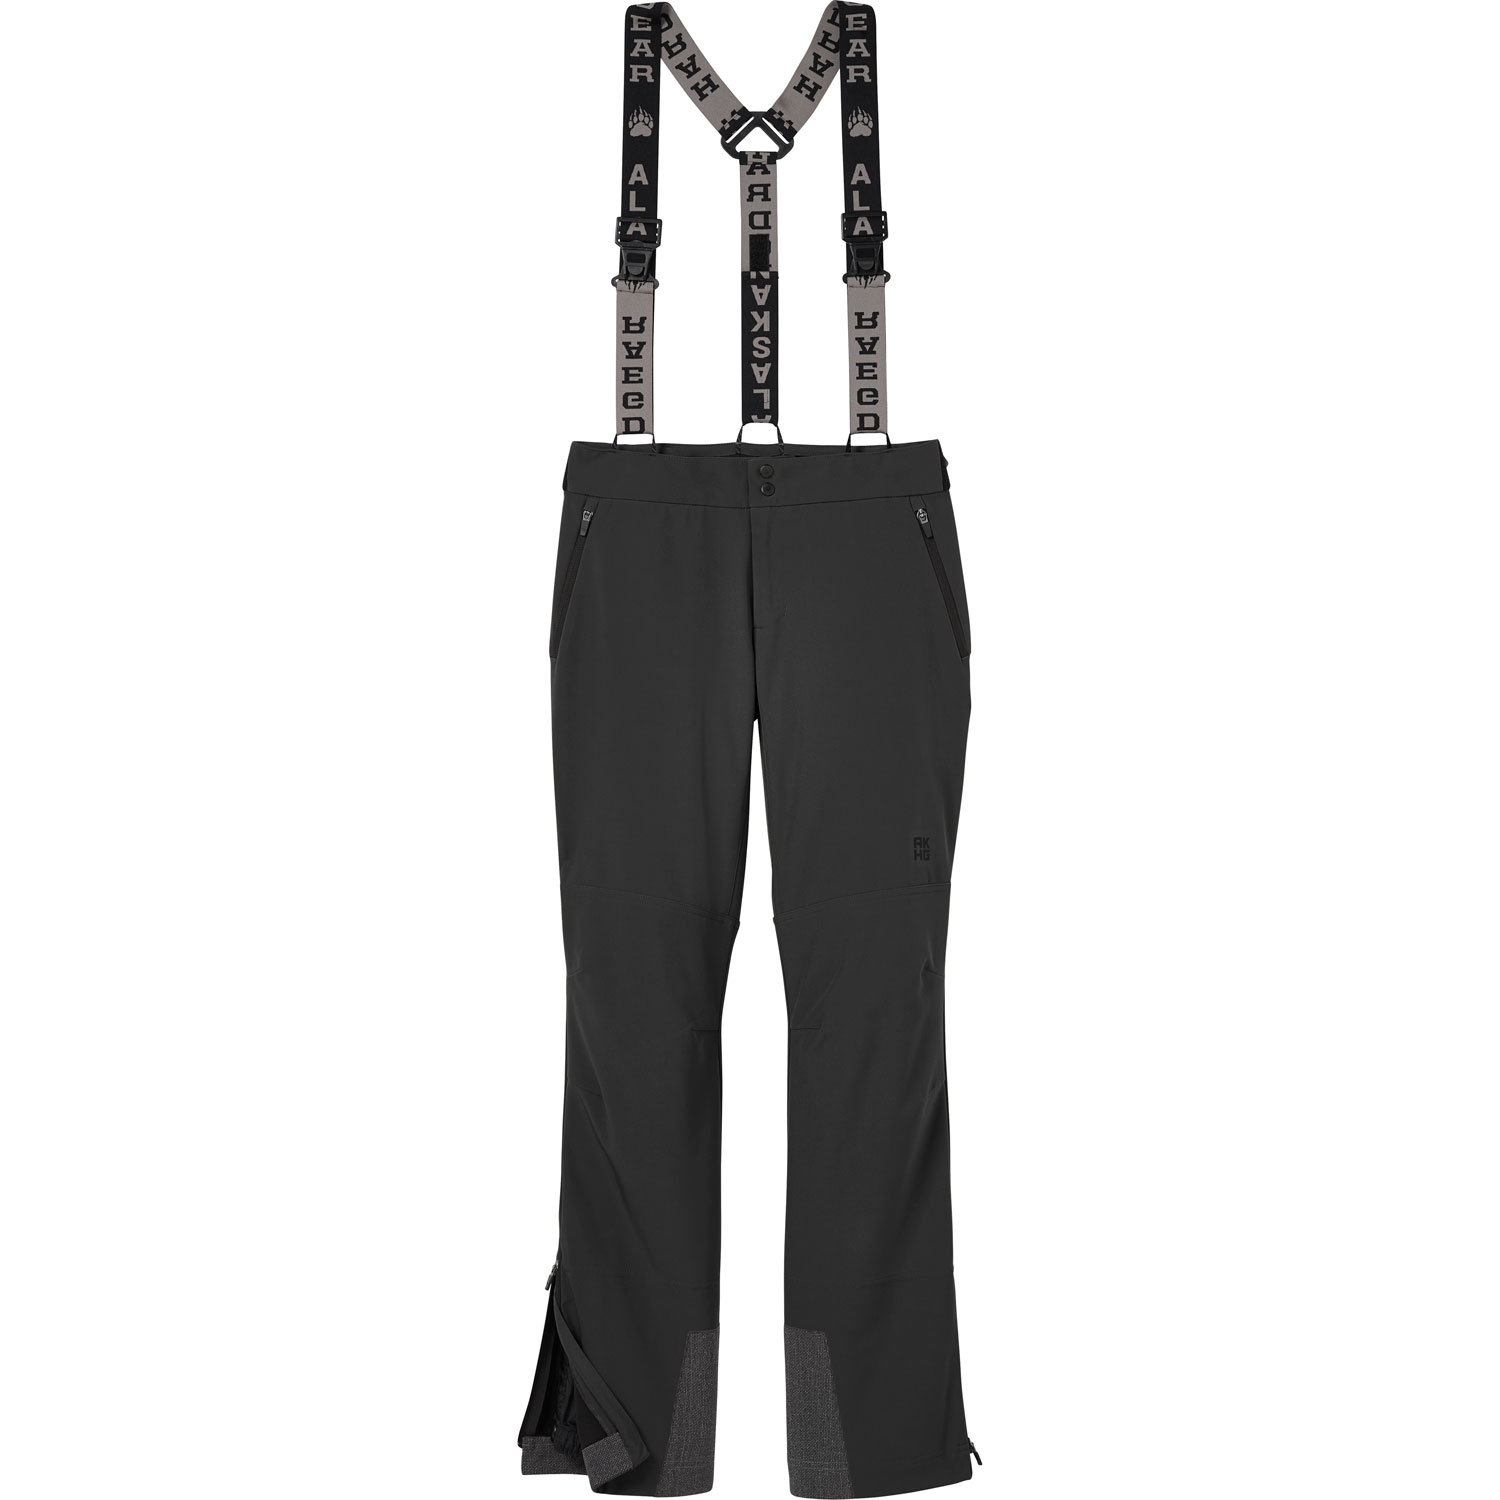 Company | Free AKHG Clime Shell Pants Trading with Soft Suspenders Women\'s Duluth